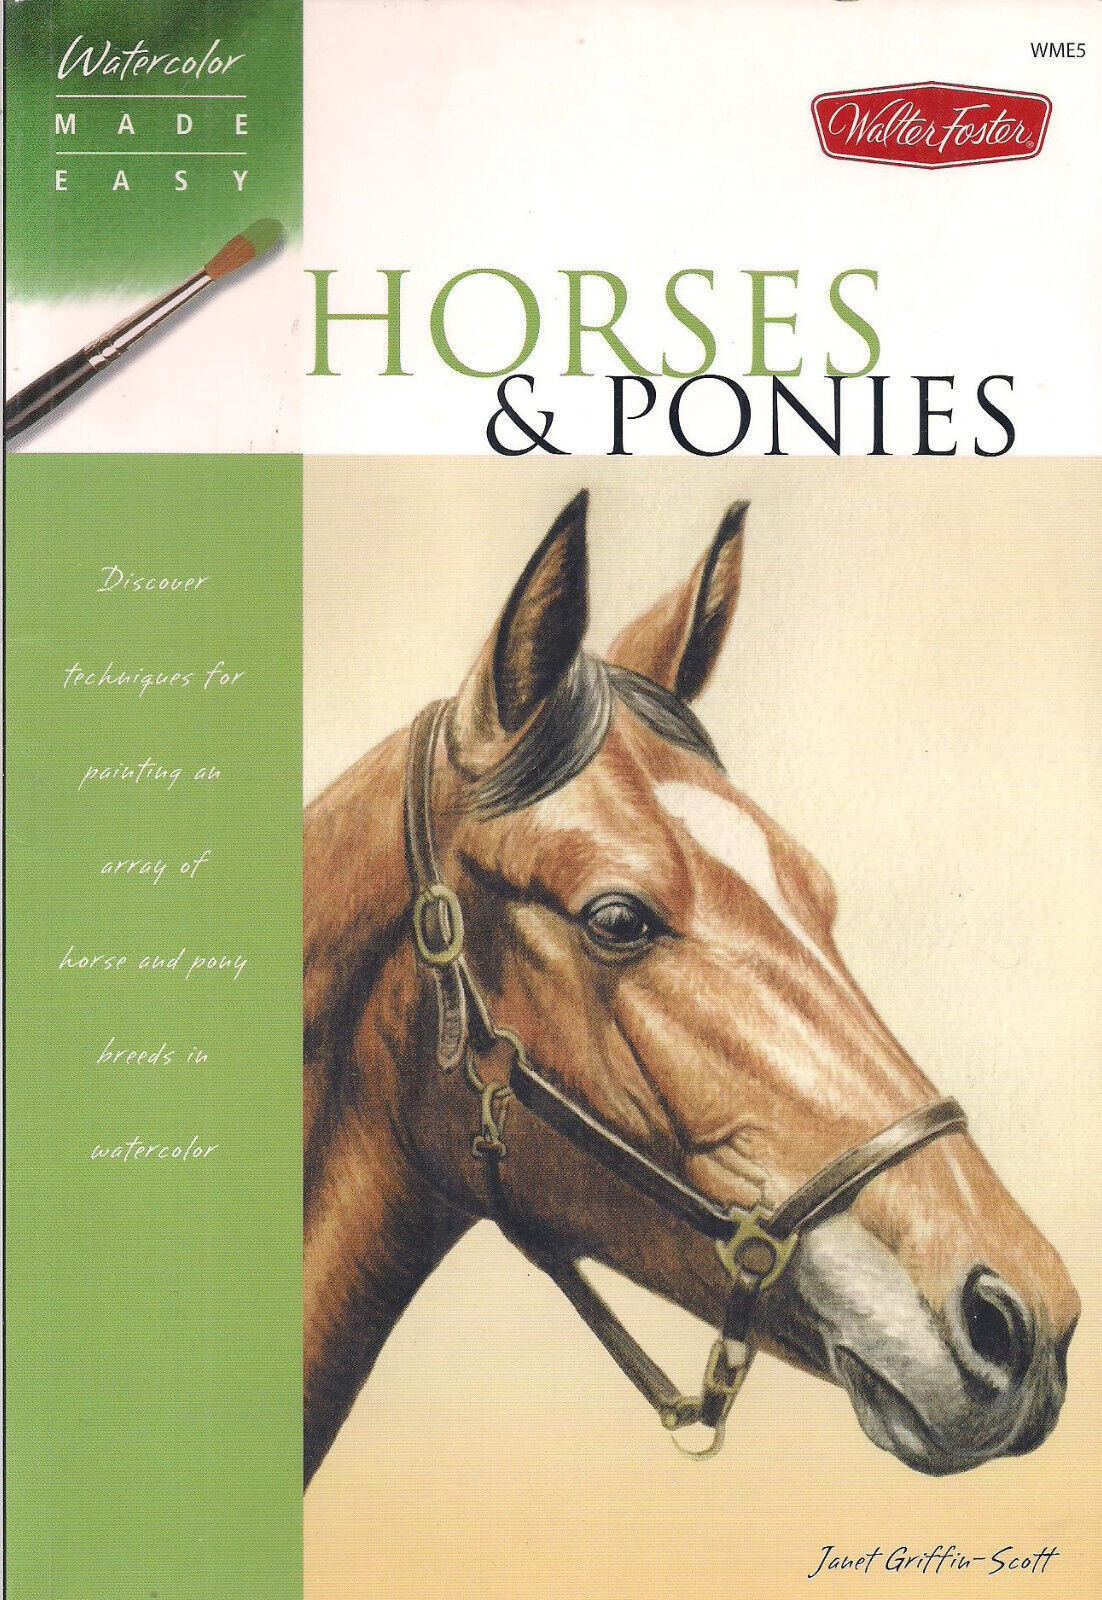 Primary image for Watercolor Made Easy, Horses & Ponies by J. Griffin-Scott (Walter Foster WME5)